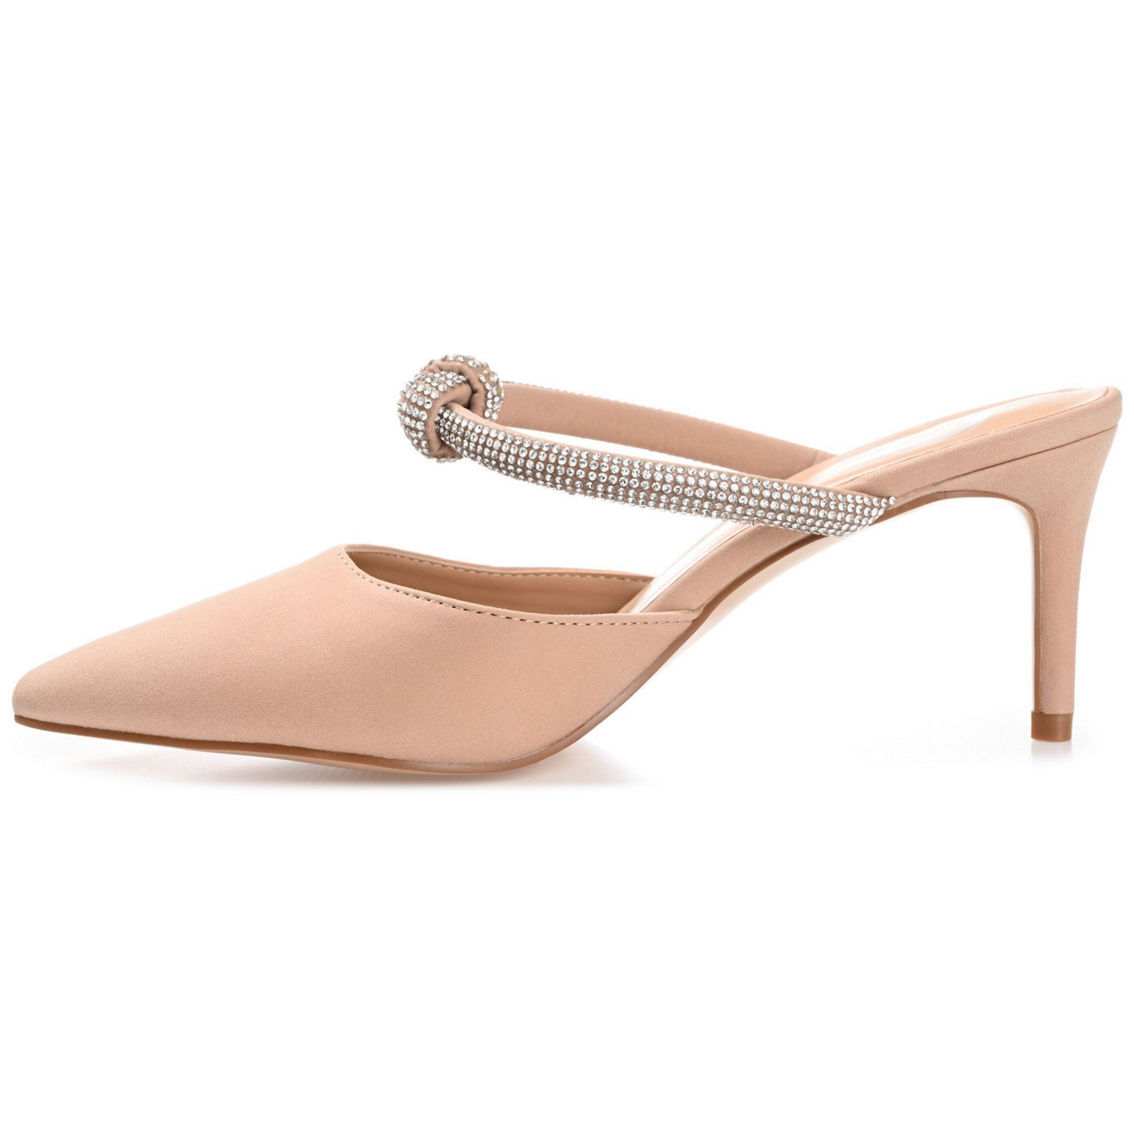 Journee Collection Women's Lunna Medium and Wide Width Pump - Image 4 of 5